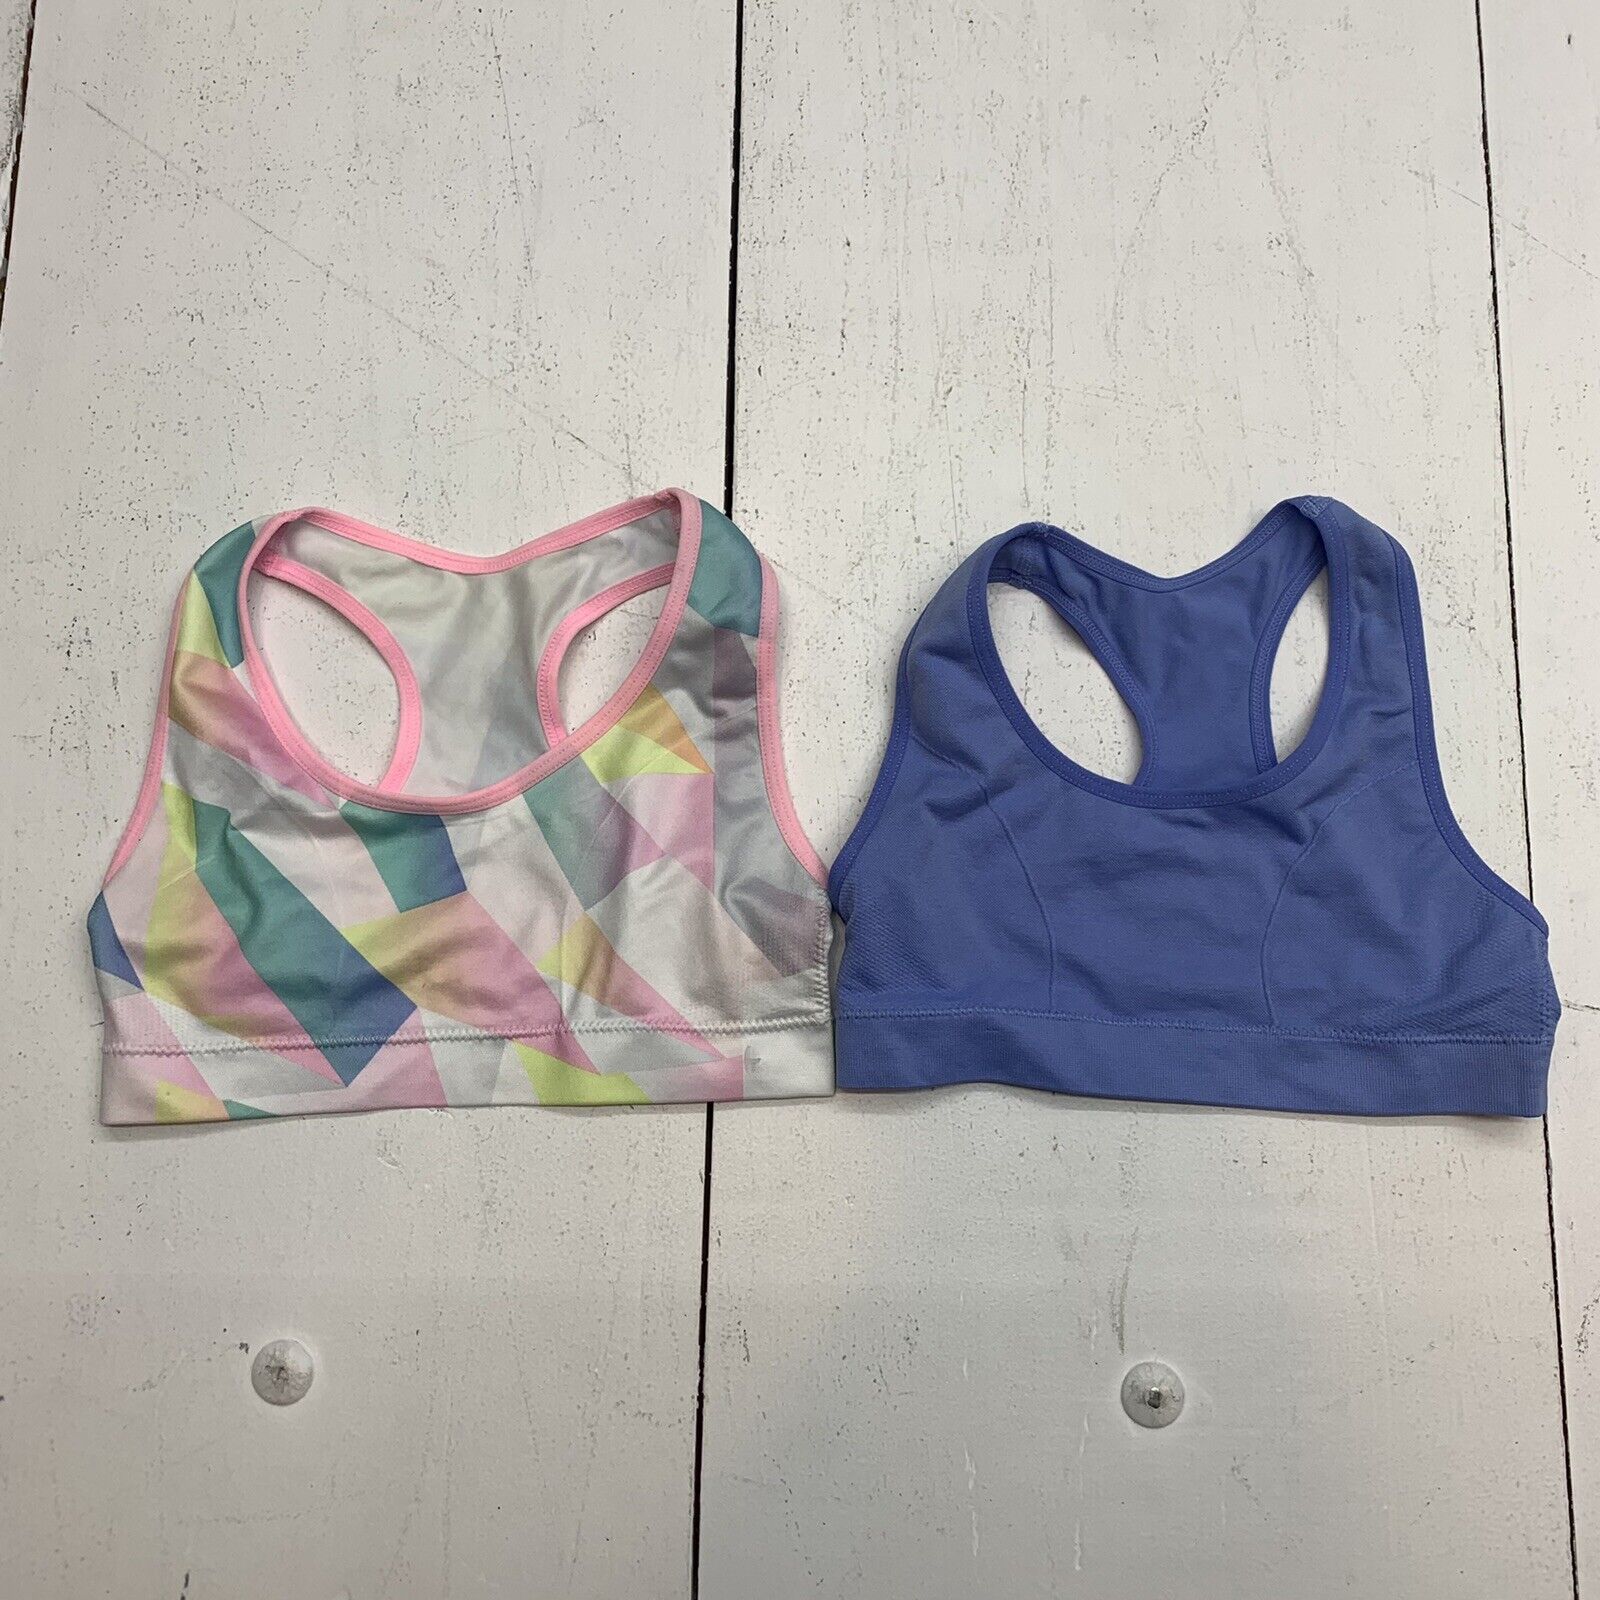 More than Magic Girls Blue And White 2 pair Sports Bra Size Small